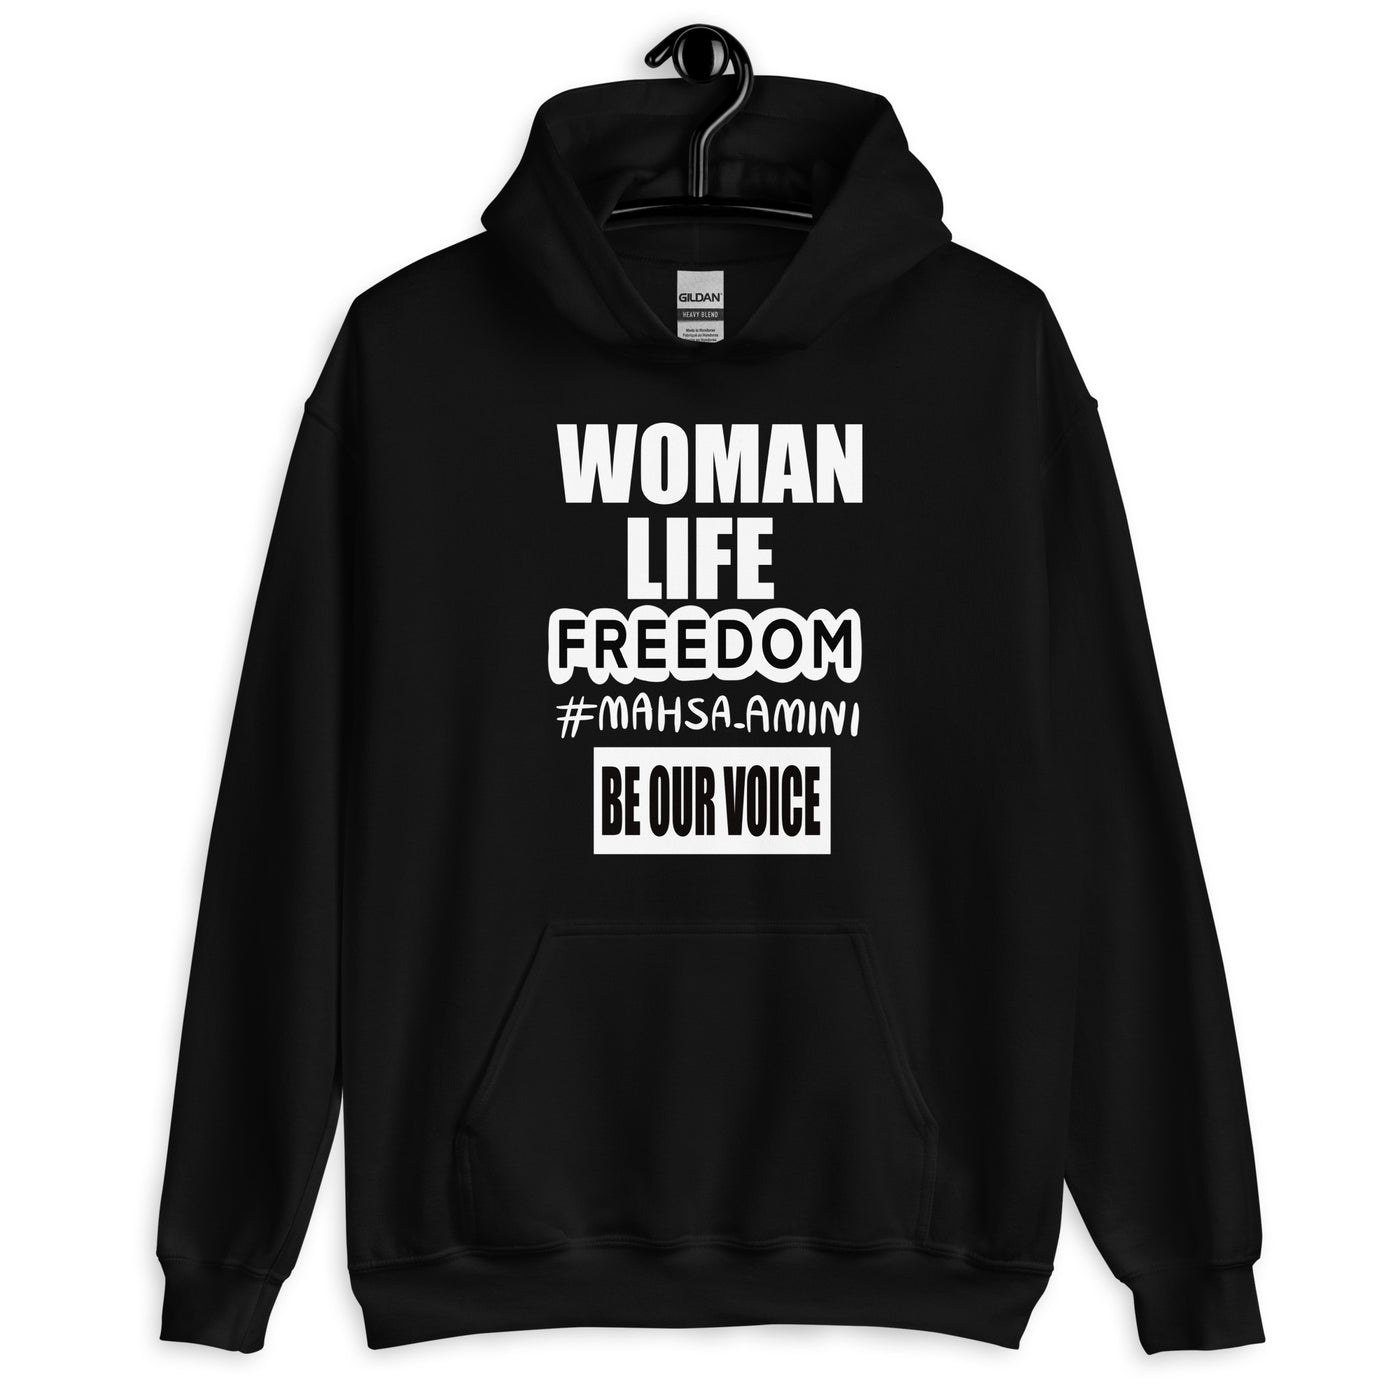 Unisex Hoodie with Woman Life Freedom imprint